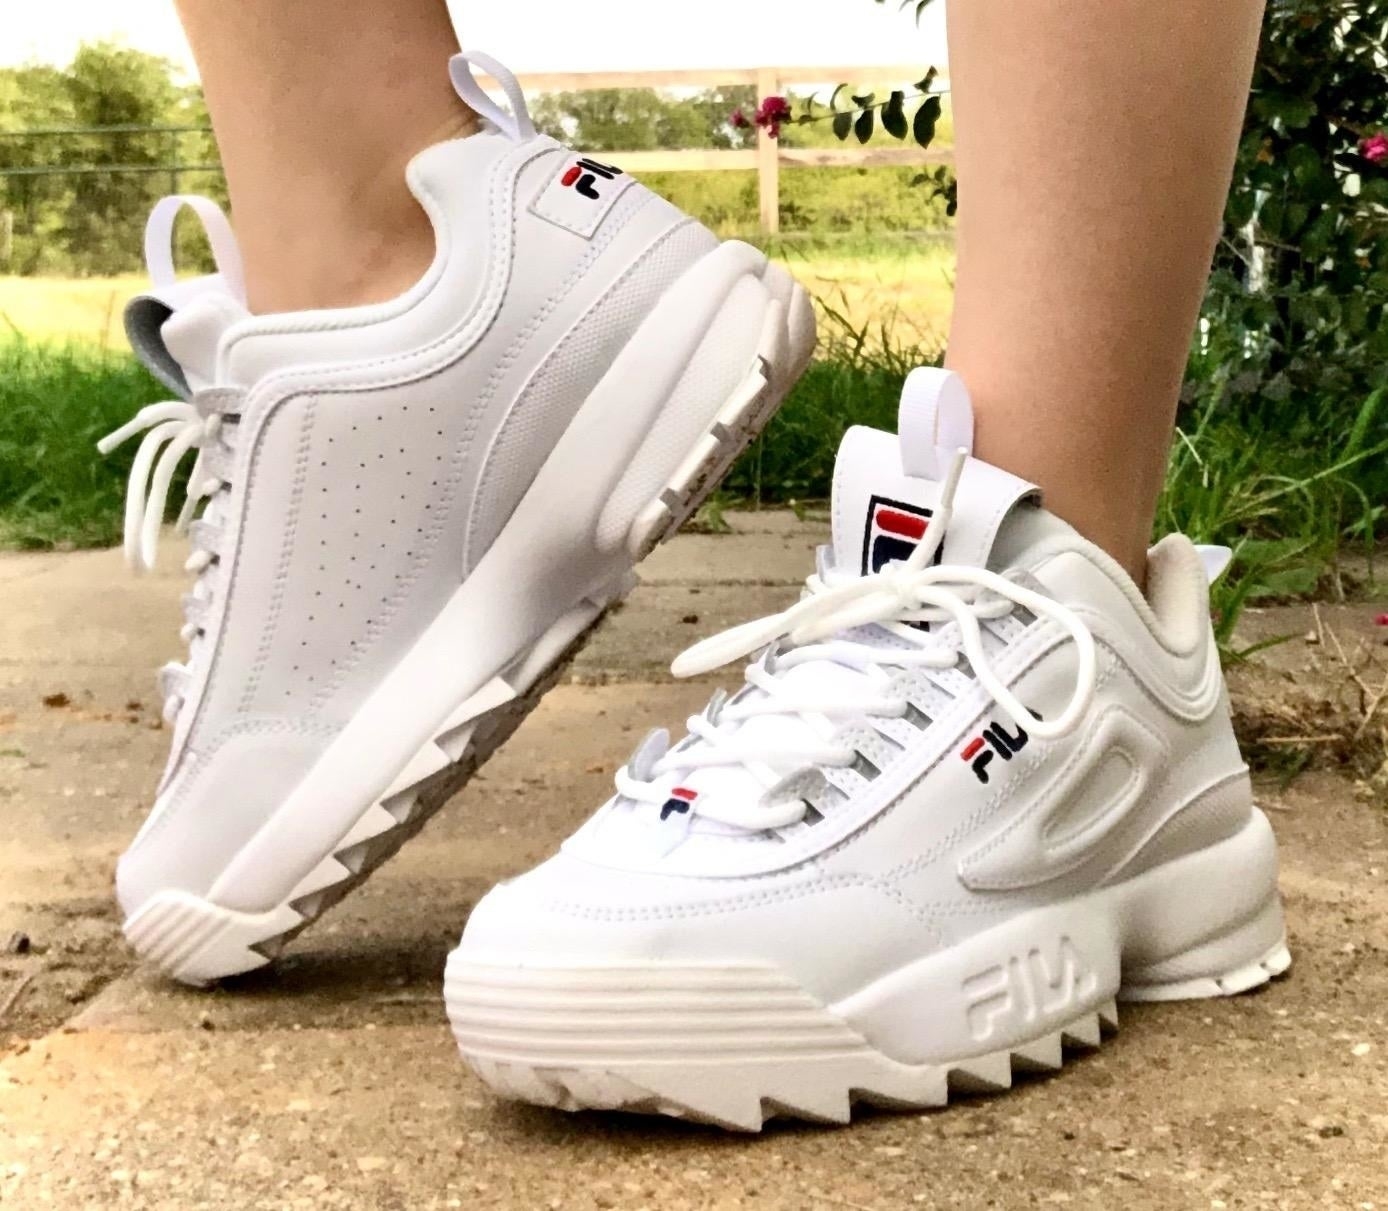 Person wearing white FILA sneakers with chunky soles, standing on grass